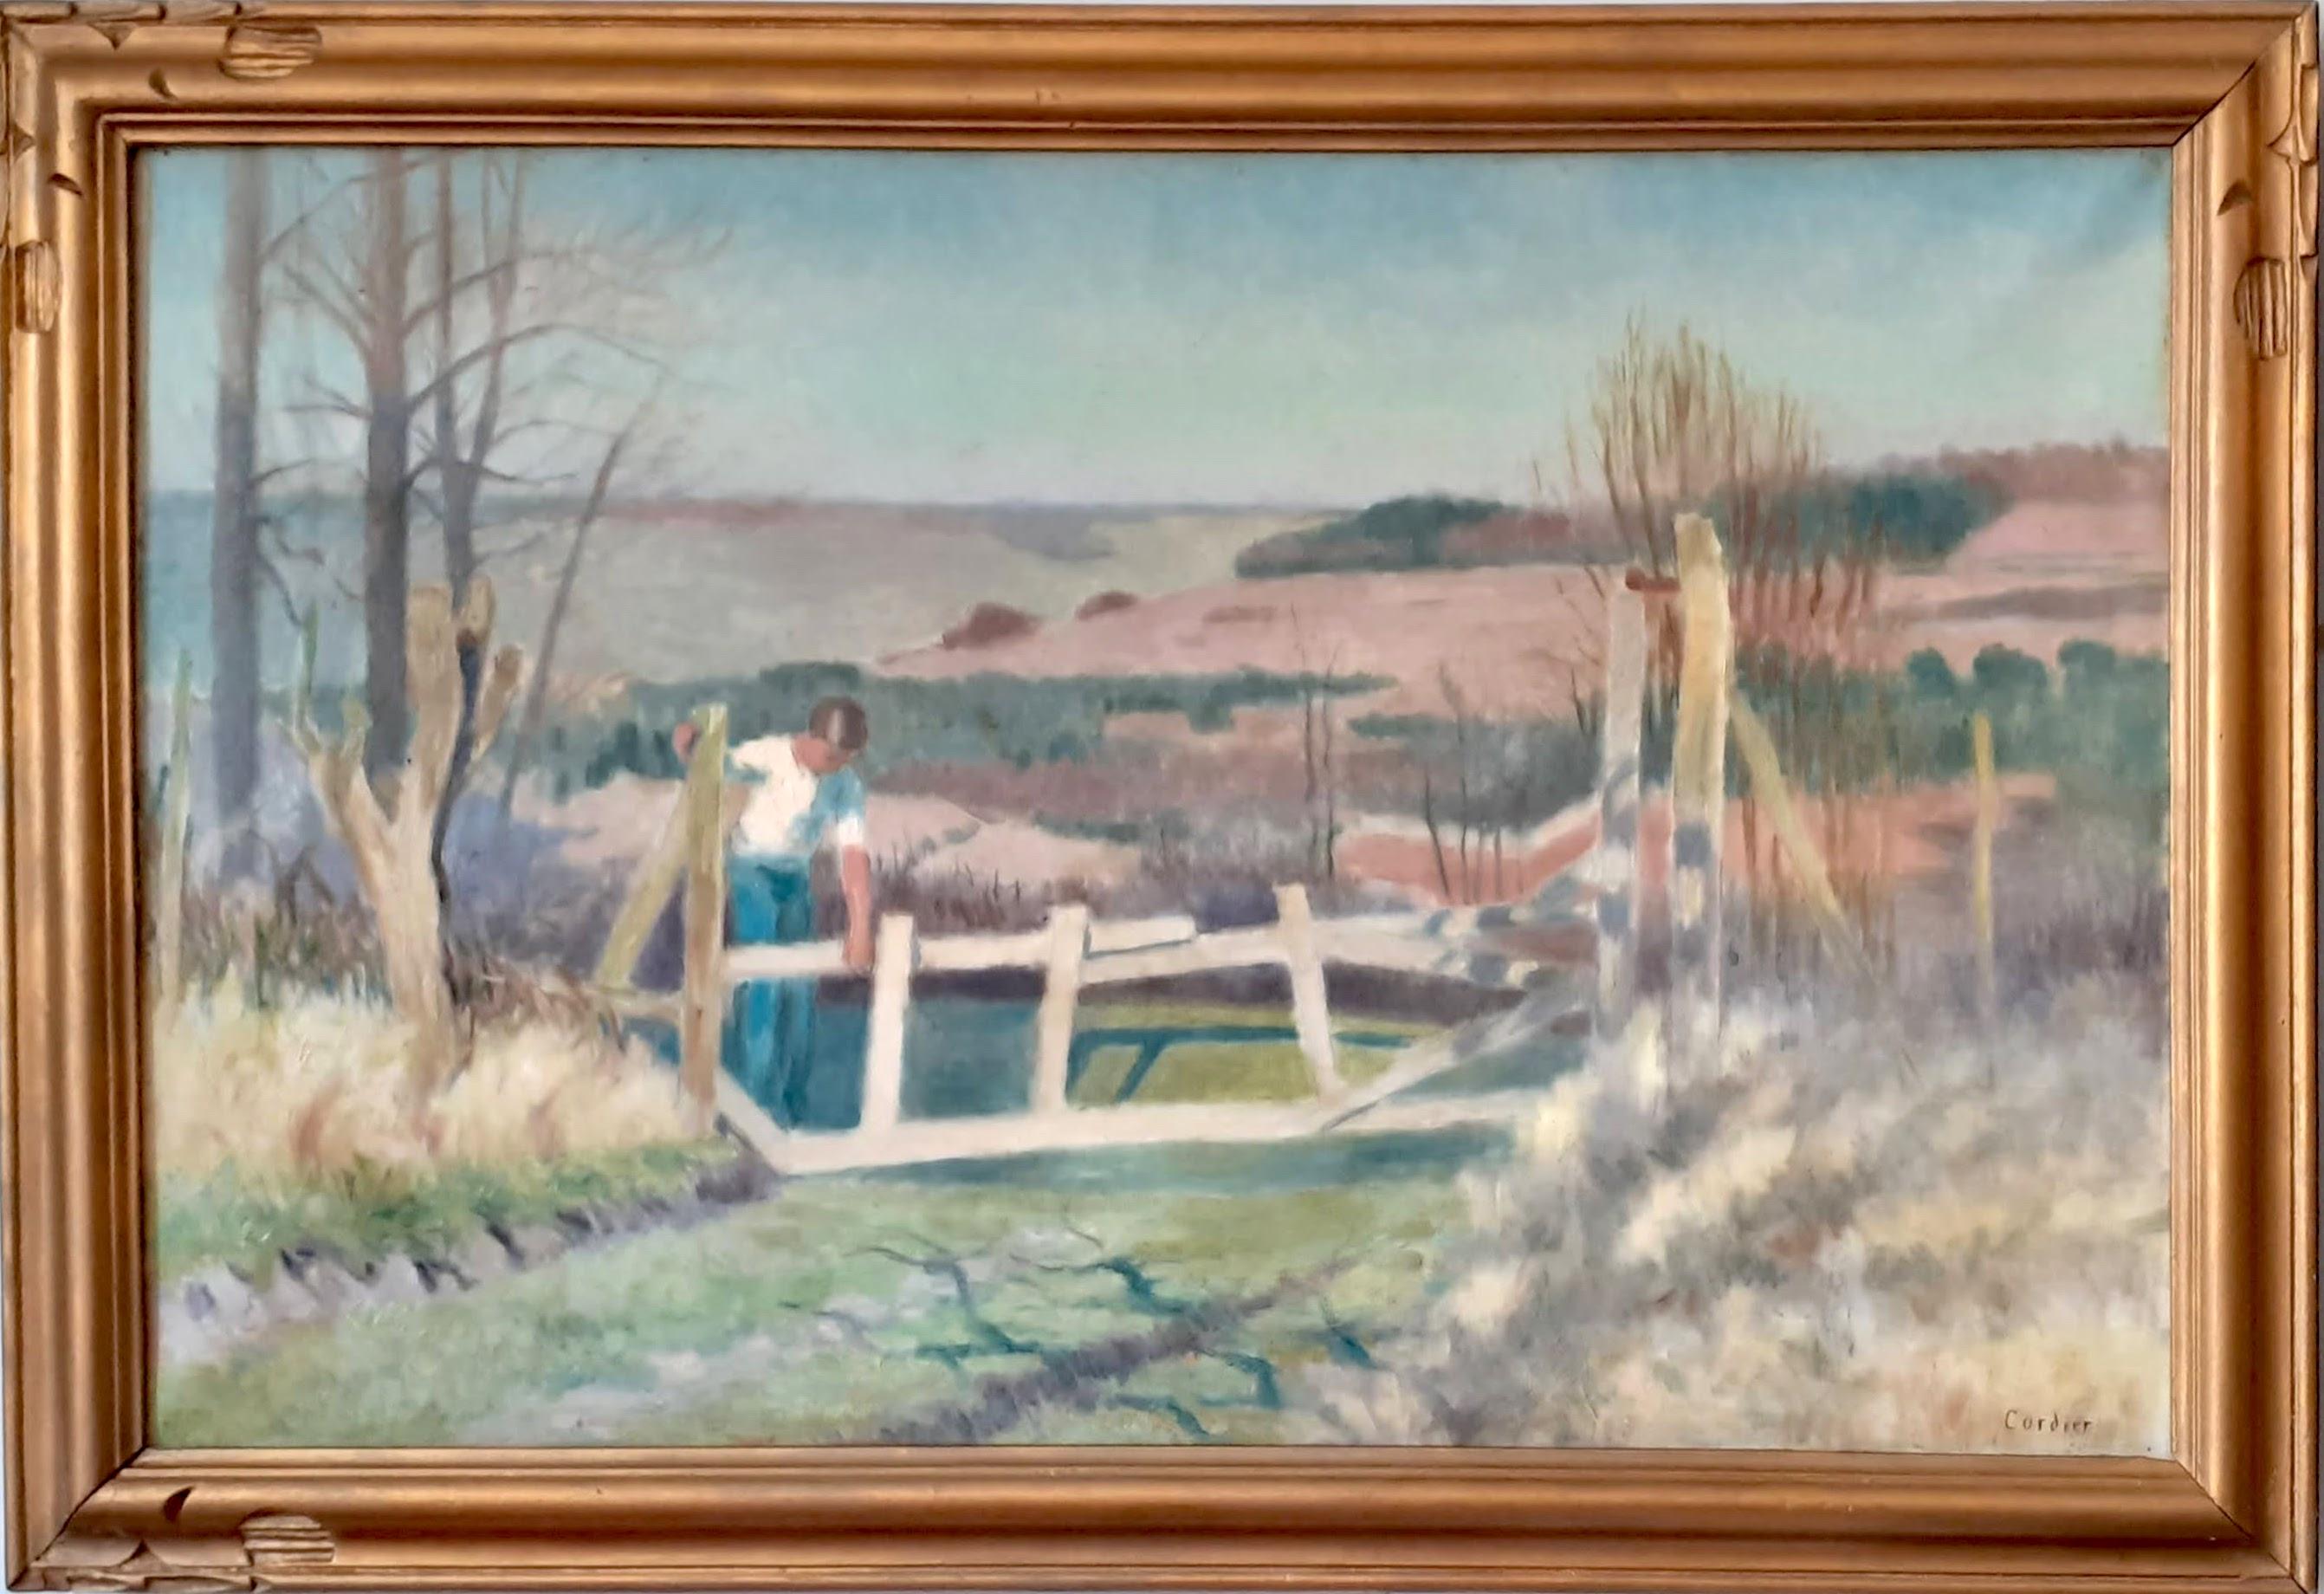 Eugene Cordier  Figurative Painting - Boy in a landscape, large art deco period painting 